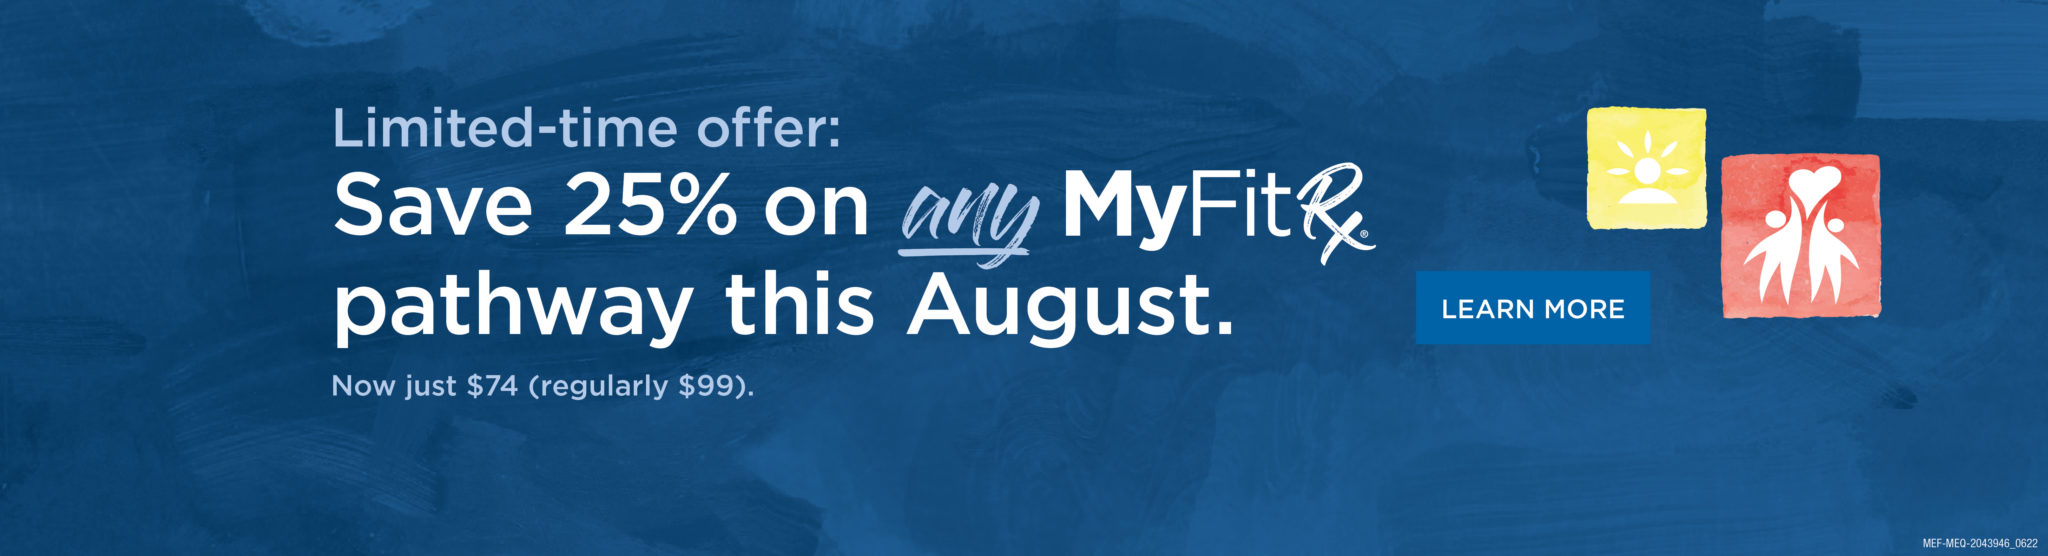 Limited-time offer: Save 25% on any MyFit& pathway this August. Now just $74 (regularly $99).